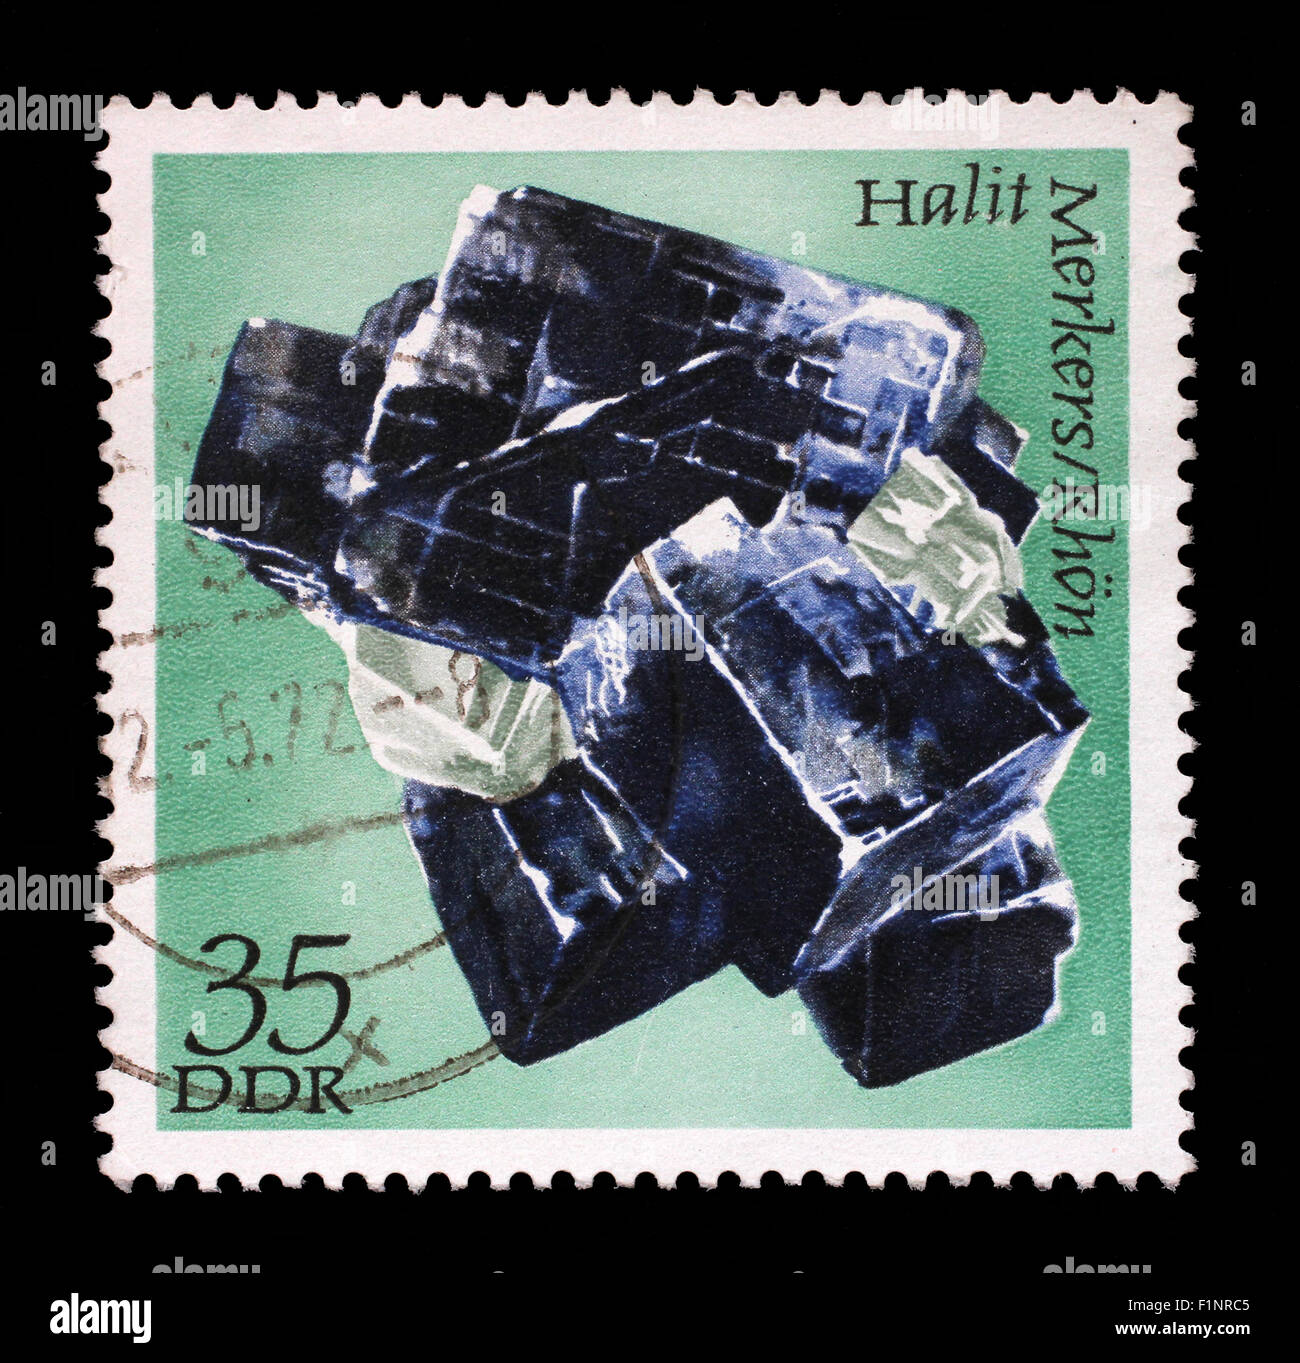 Stamp printed in GDR shows Halite from the series Minerals, circa 1972. Stock Photo